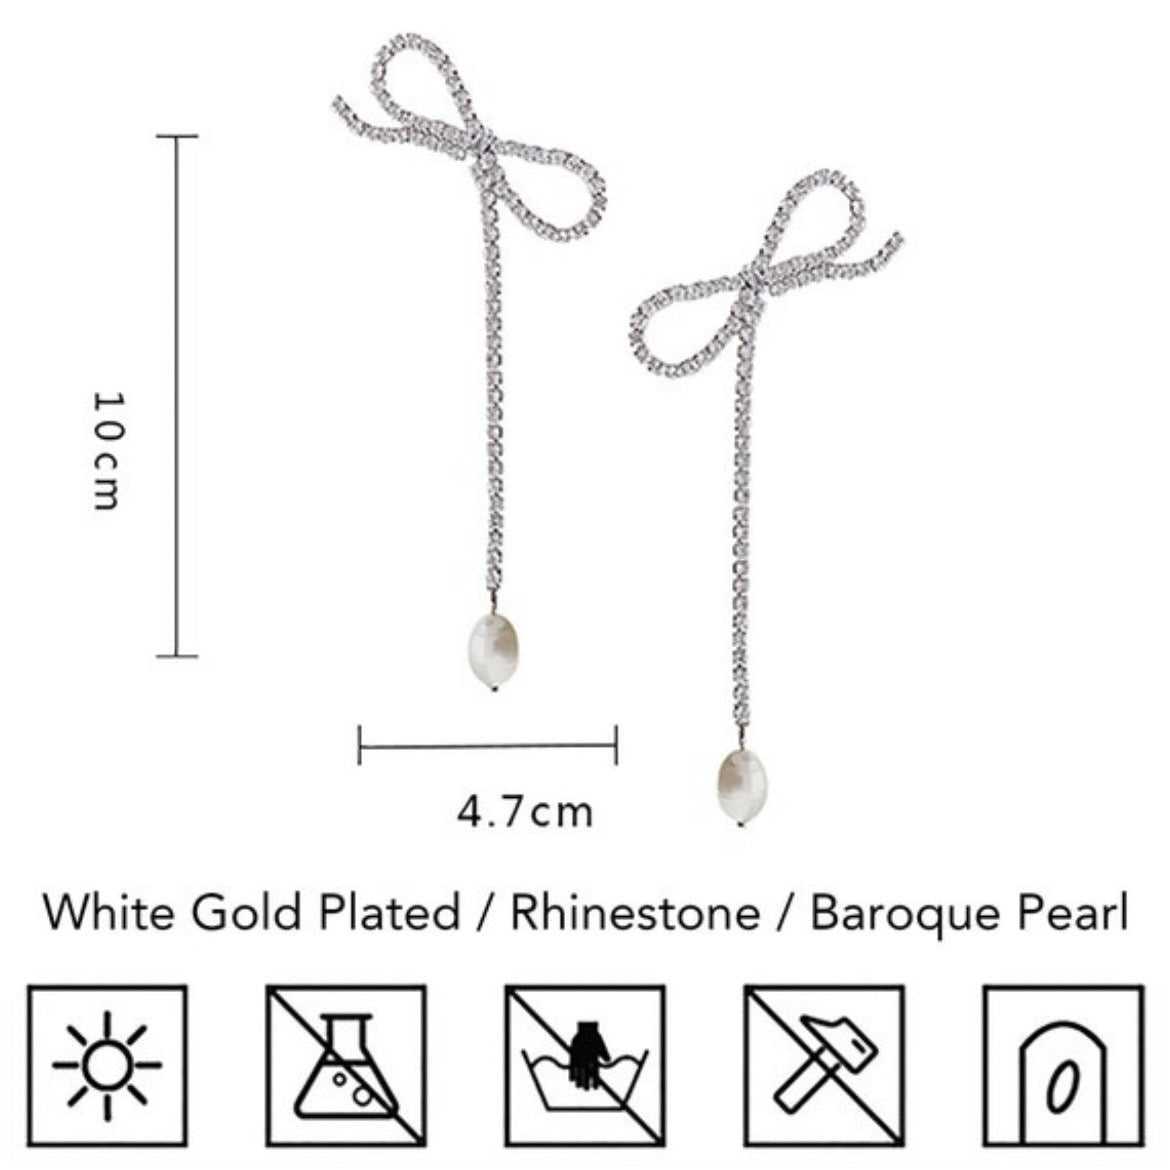 White Gold Plated w/ Rhinestone / Pearl Bow Earrings gift holiday